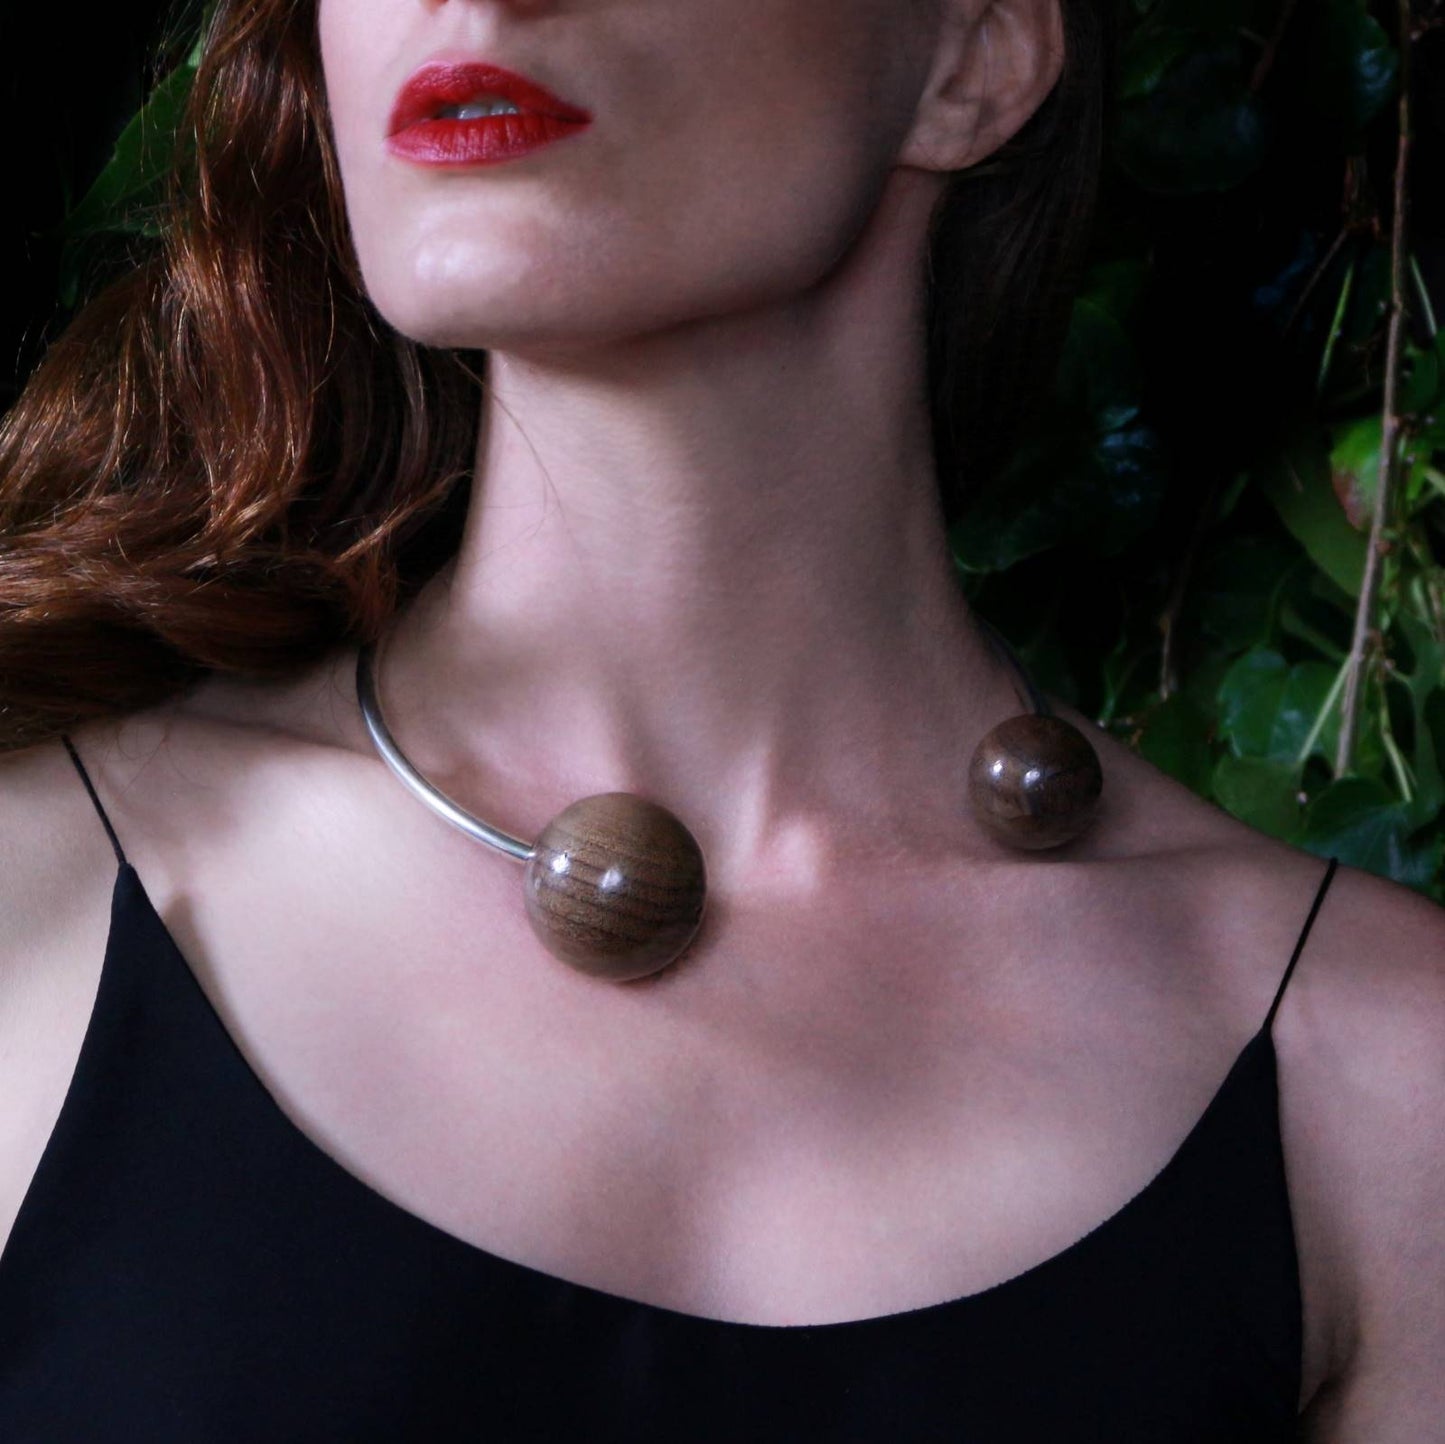 Model wearing the Gaia Double Sphere Torque Necklace by Silverwood Jewellery with large wooden spheres beads in walnut and sterling silver torque necklace